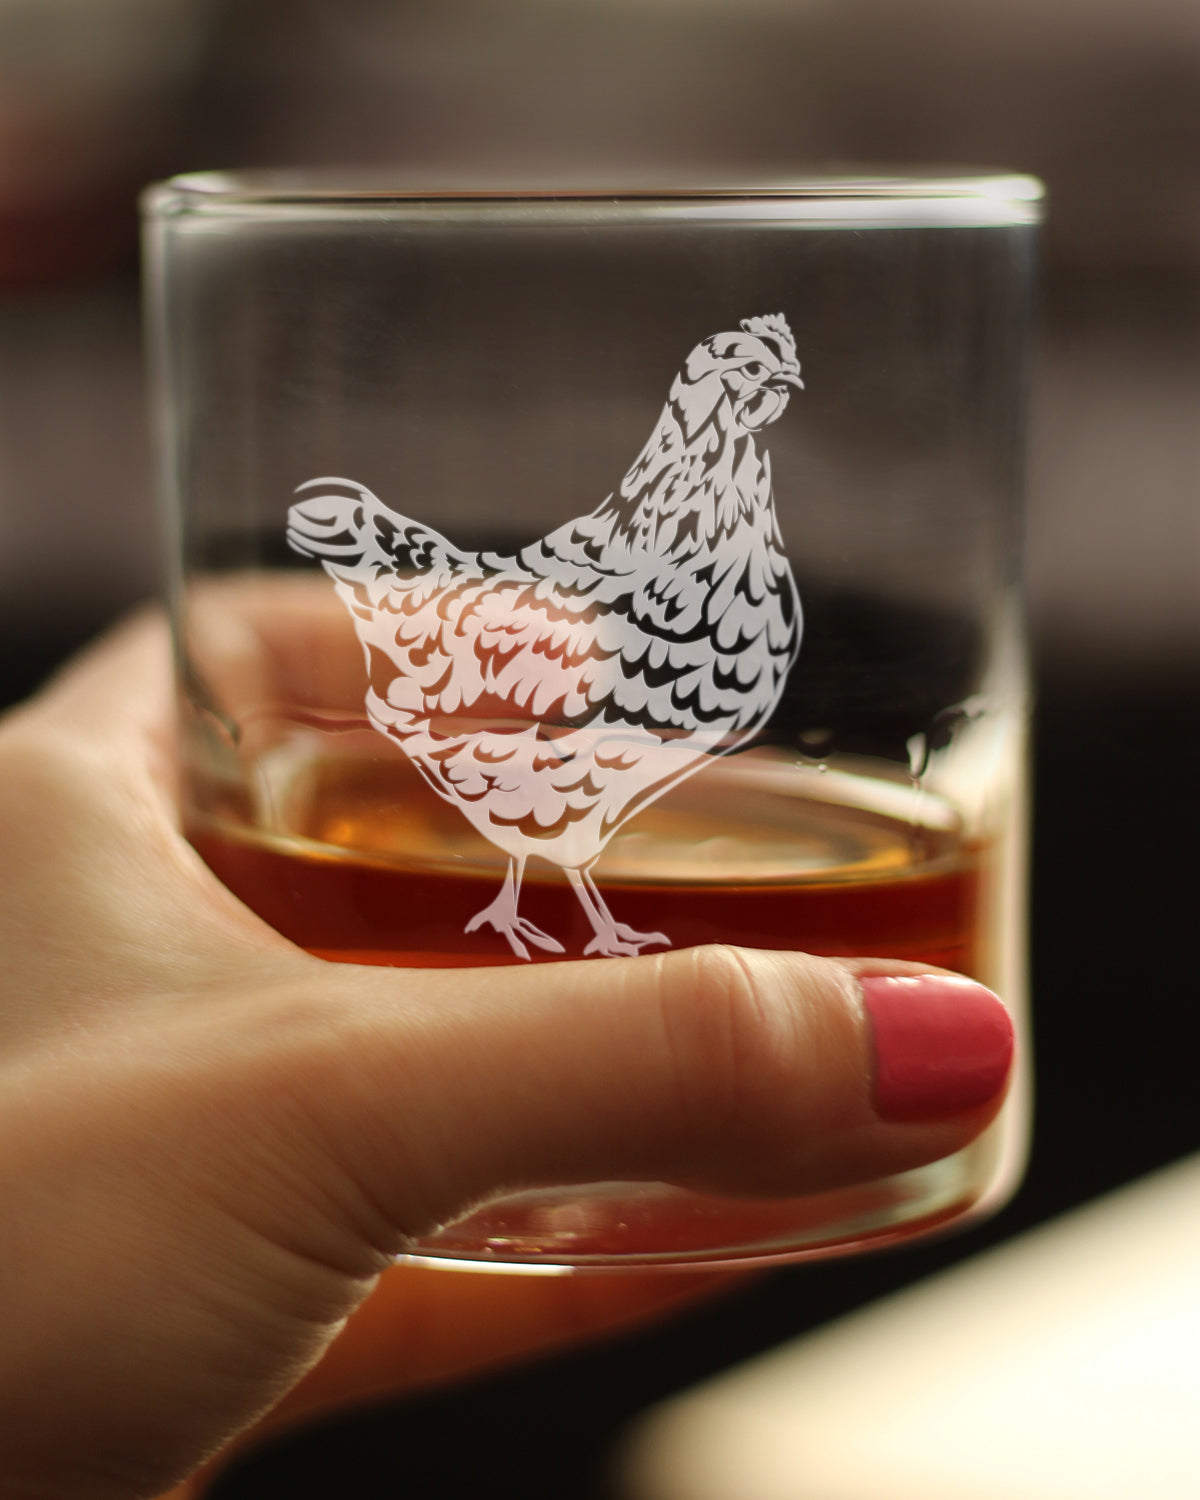 Hen - 10 oz Rocks Glass or Old Fashioned Glass - Cute Farmhouse Decor Gifts for Lovers of Hens and Whiskey